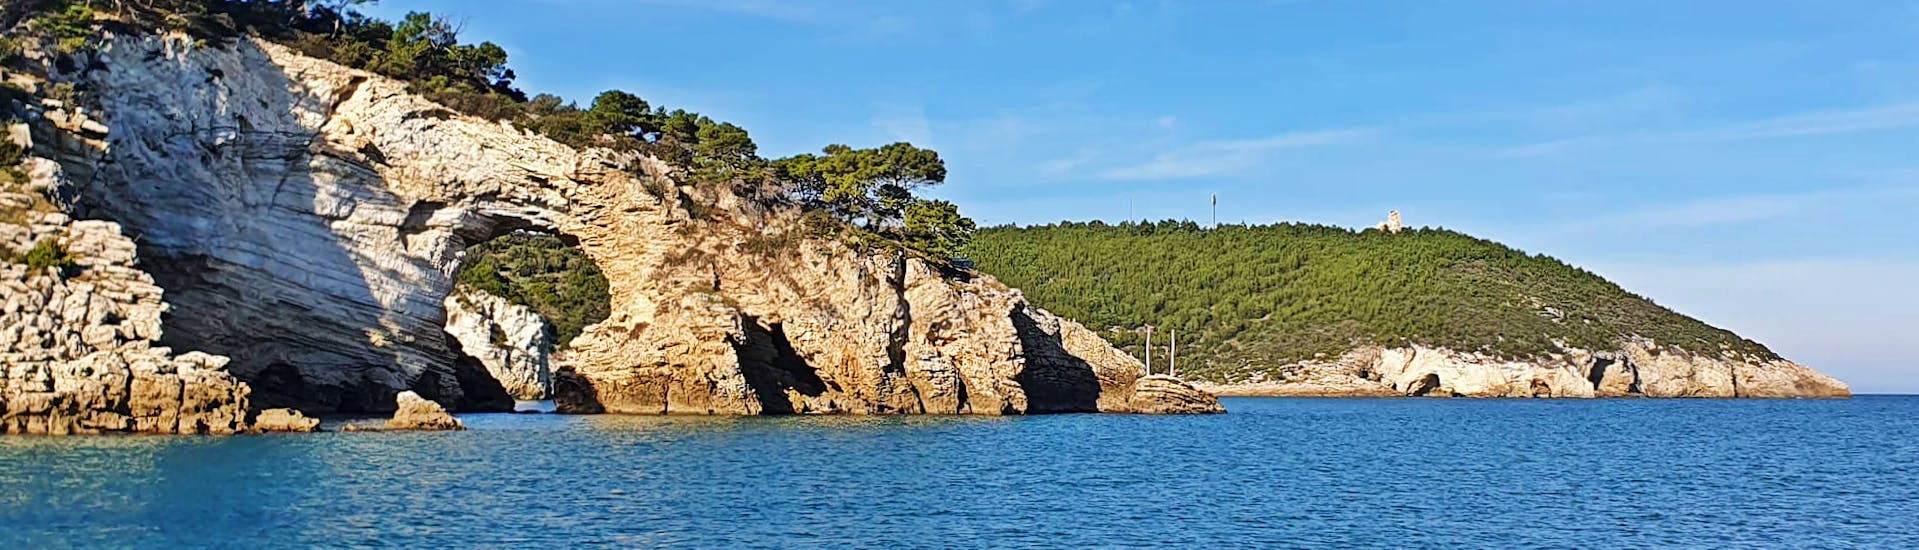 Picture of the Architiello taken from the gulet from Caicco Eco Freedom Vieste during the Boat Trip from Vieste to the Gargano Coast with Apéritif.